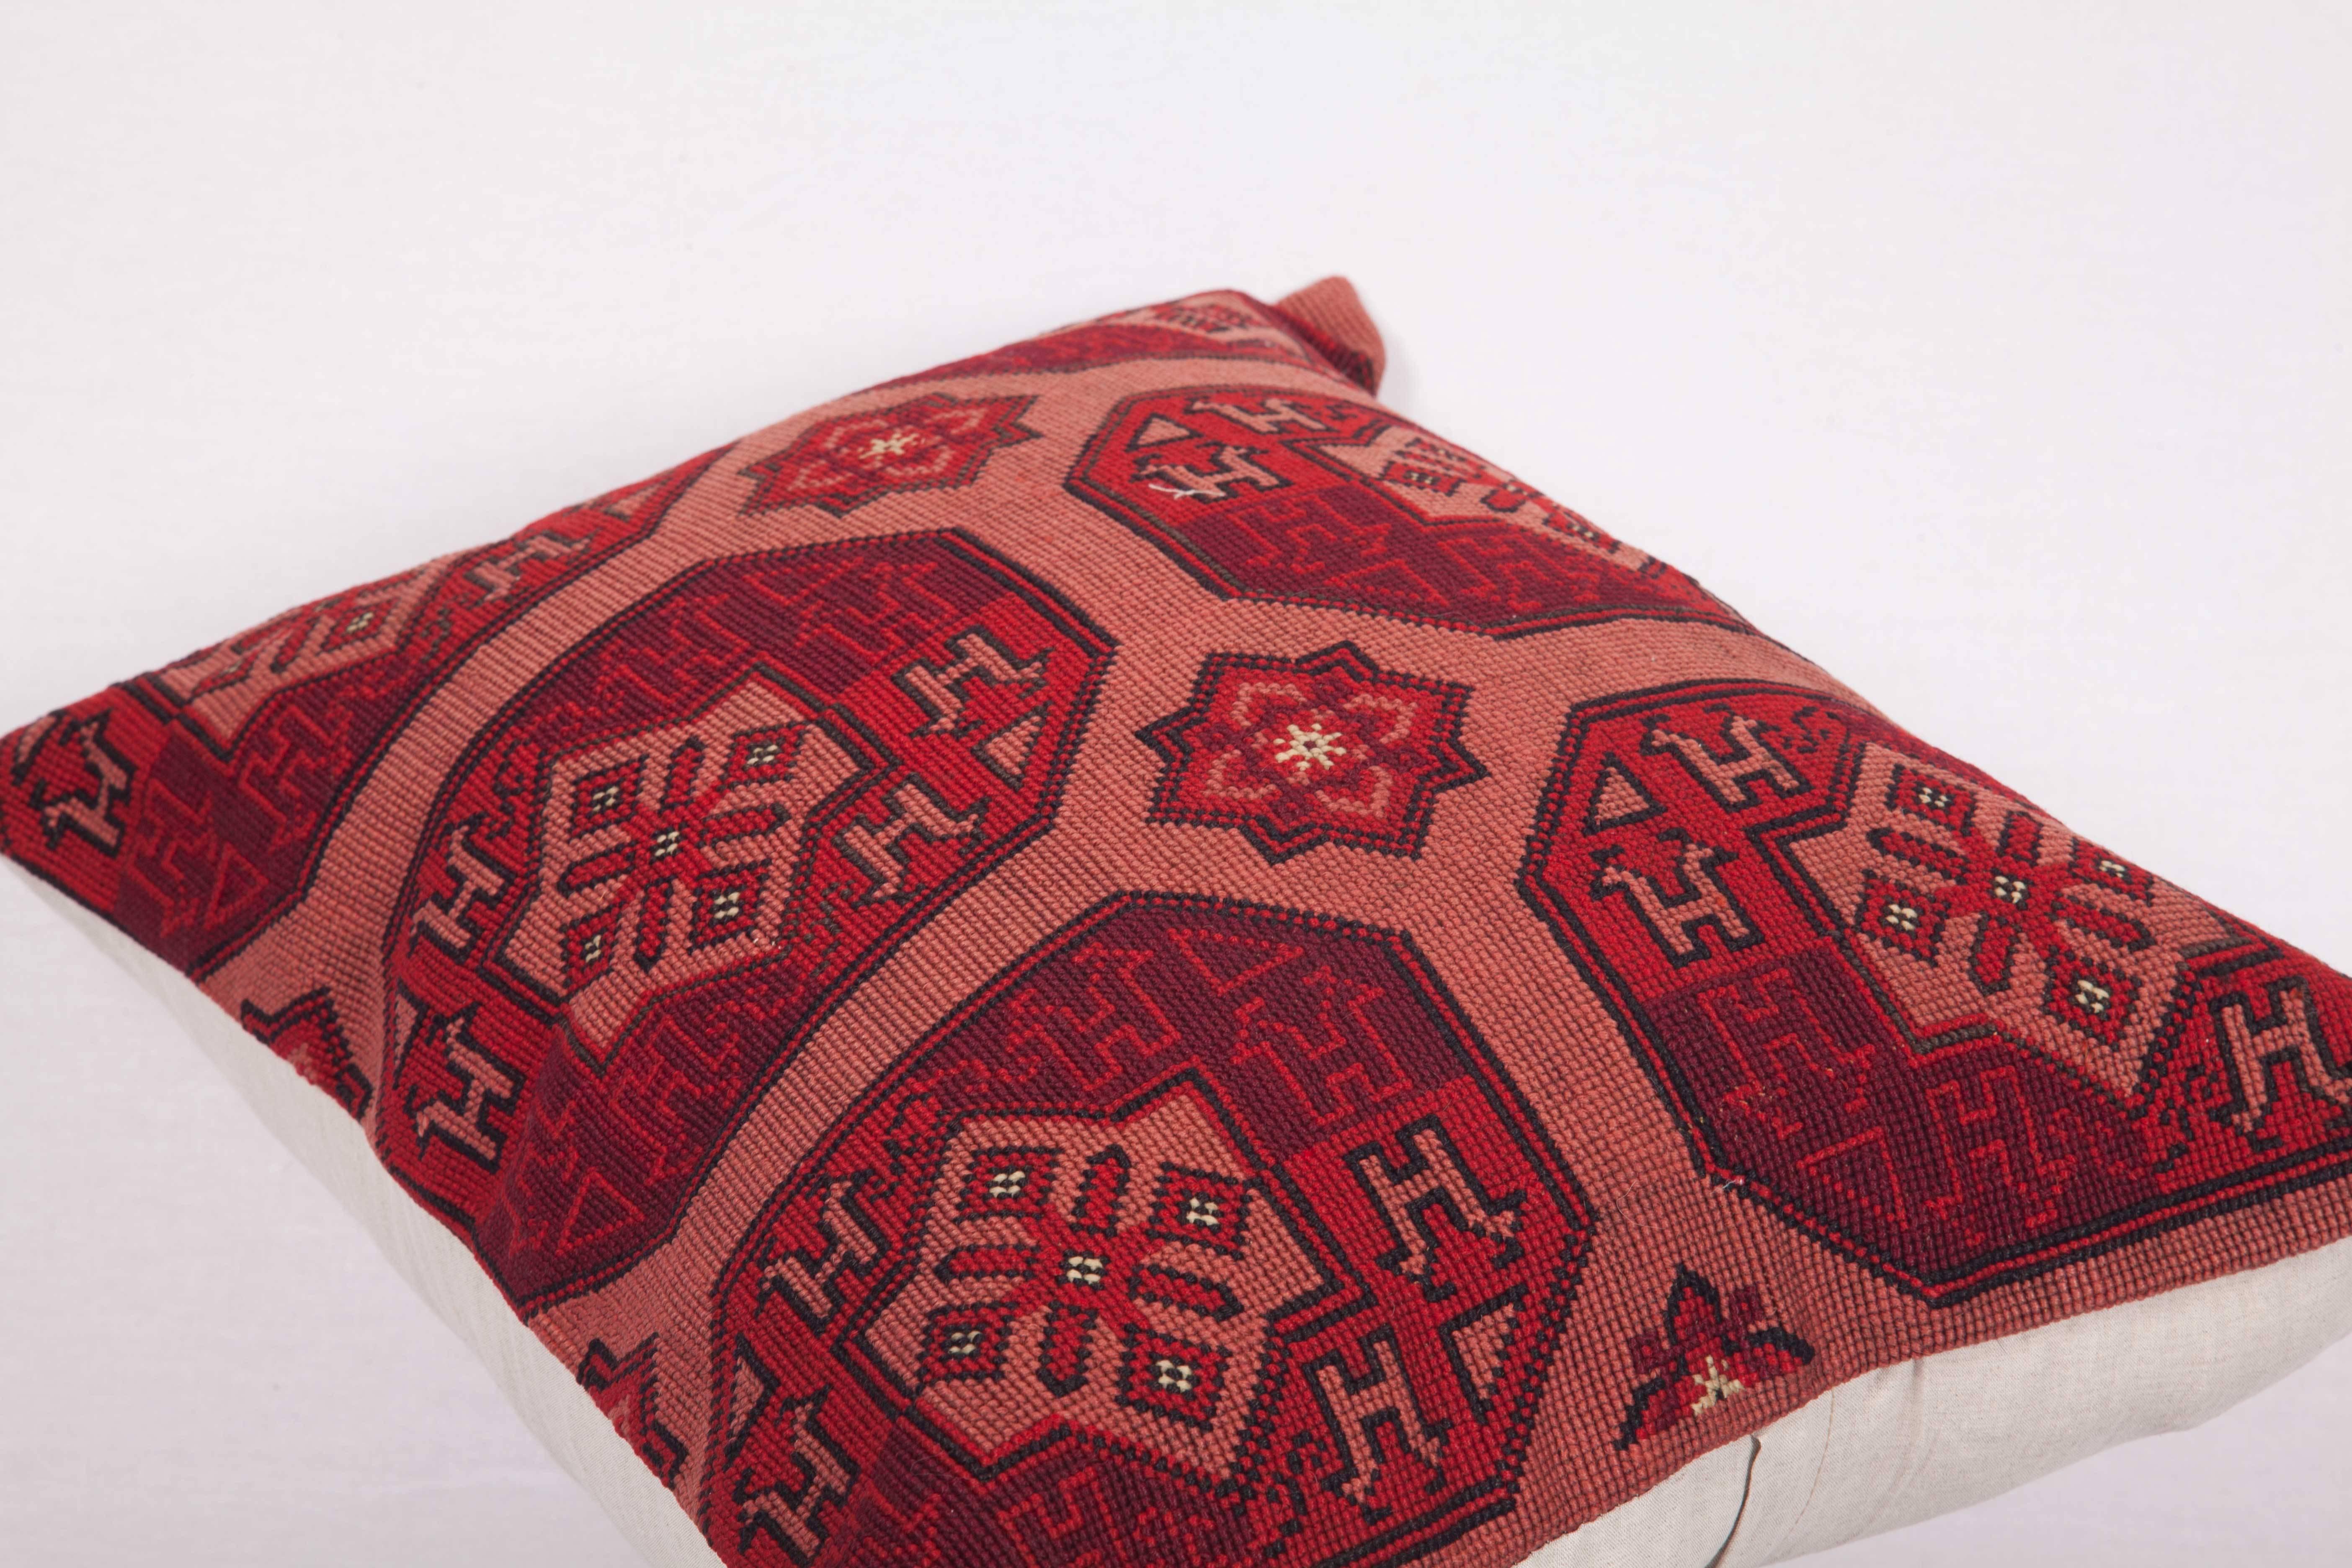 Uzbek Pillow Made Out of an Early 20th Century Central Asian Cross Stitch Embroidery